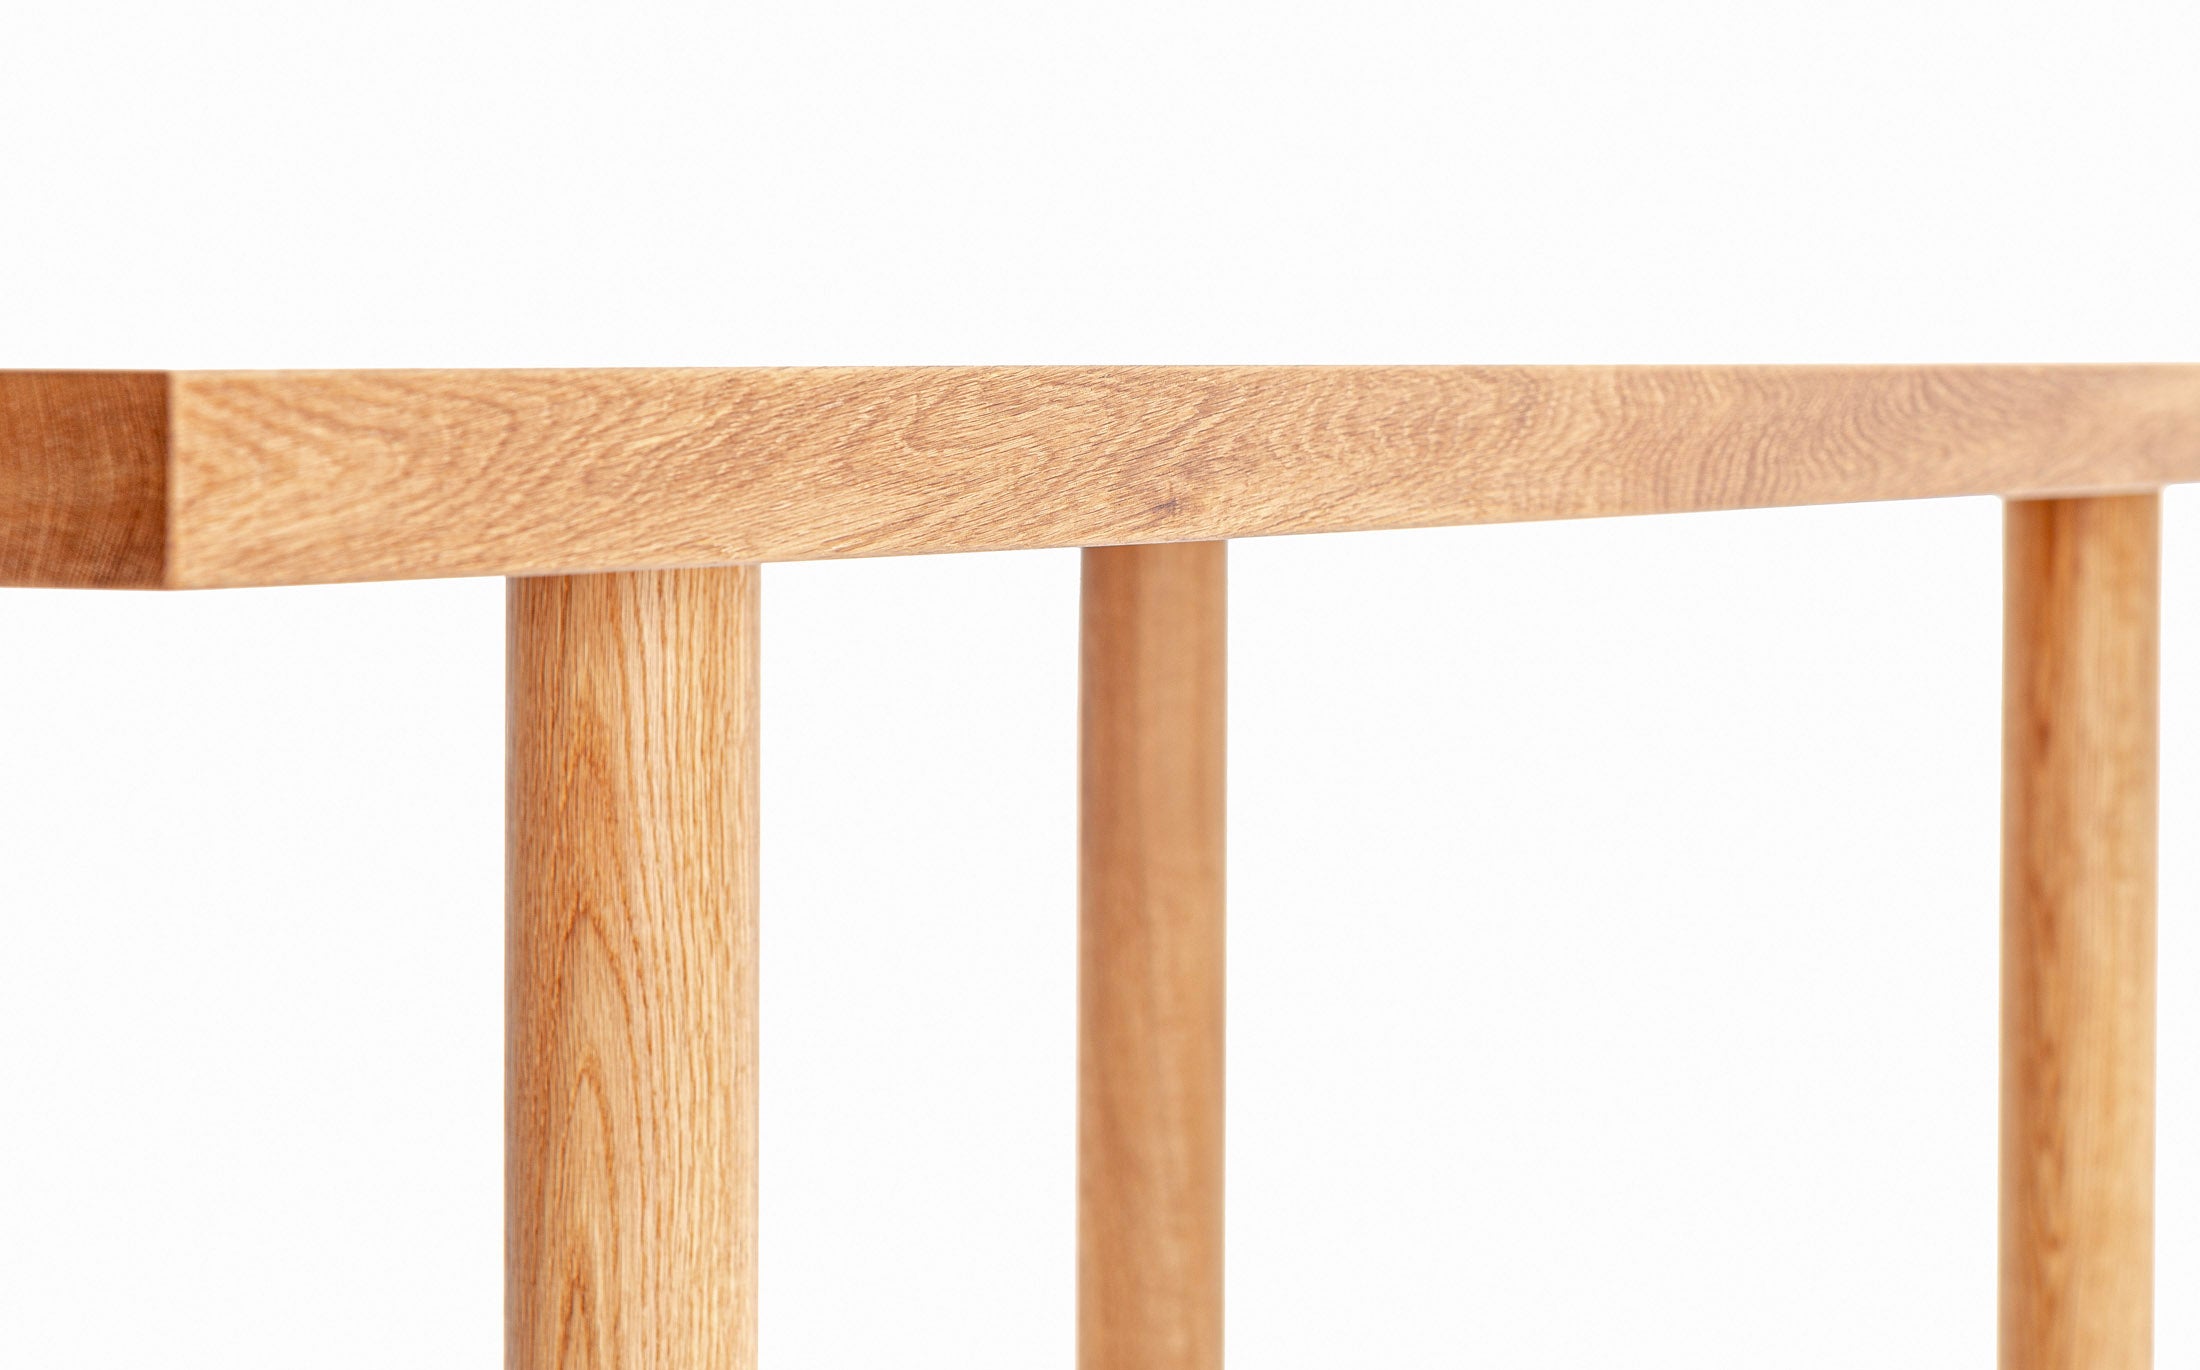 Atelier Zumthor working table - Round legs #Wood Finish_beeswax